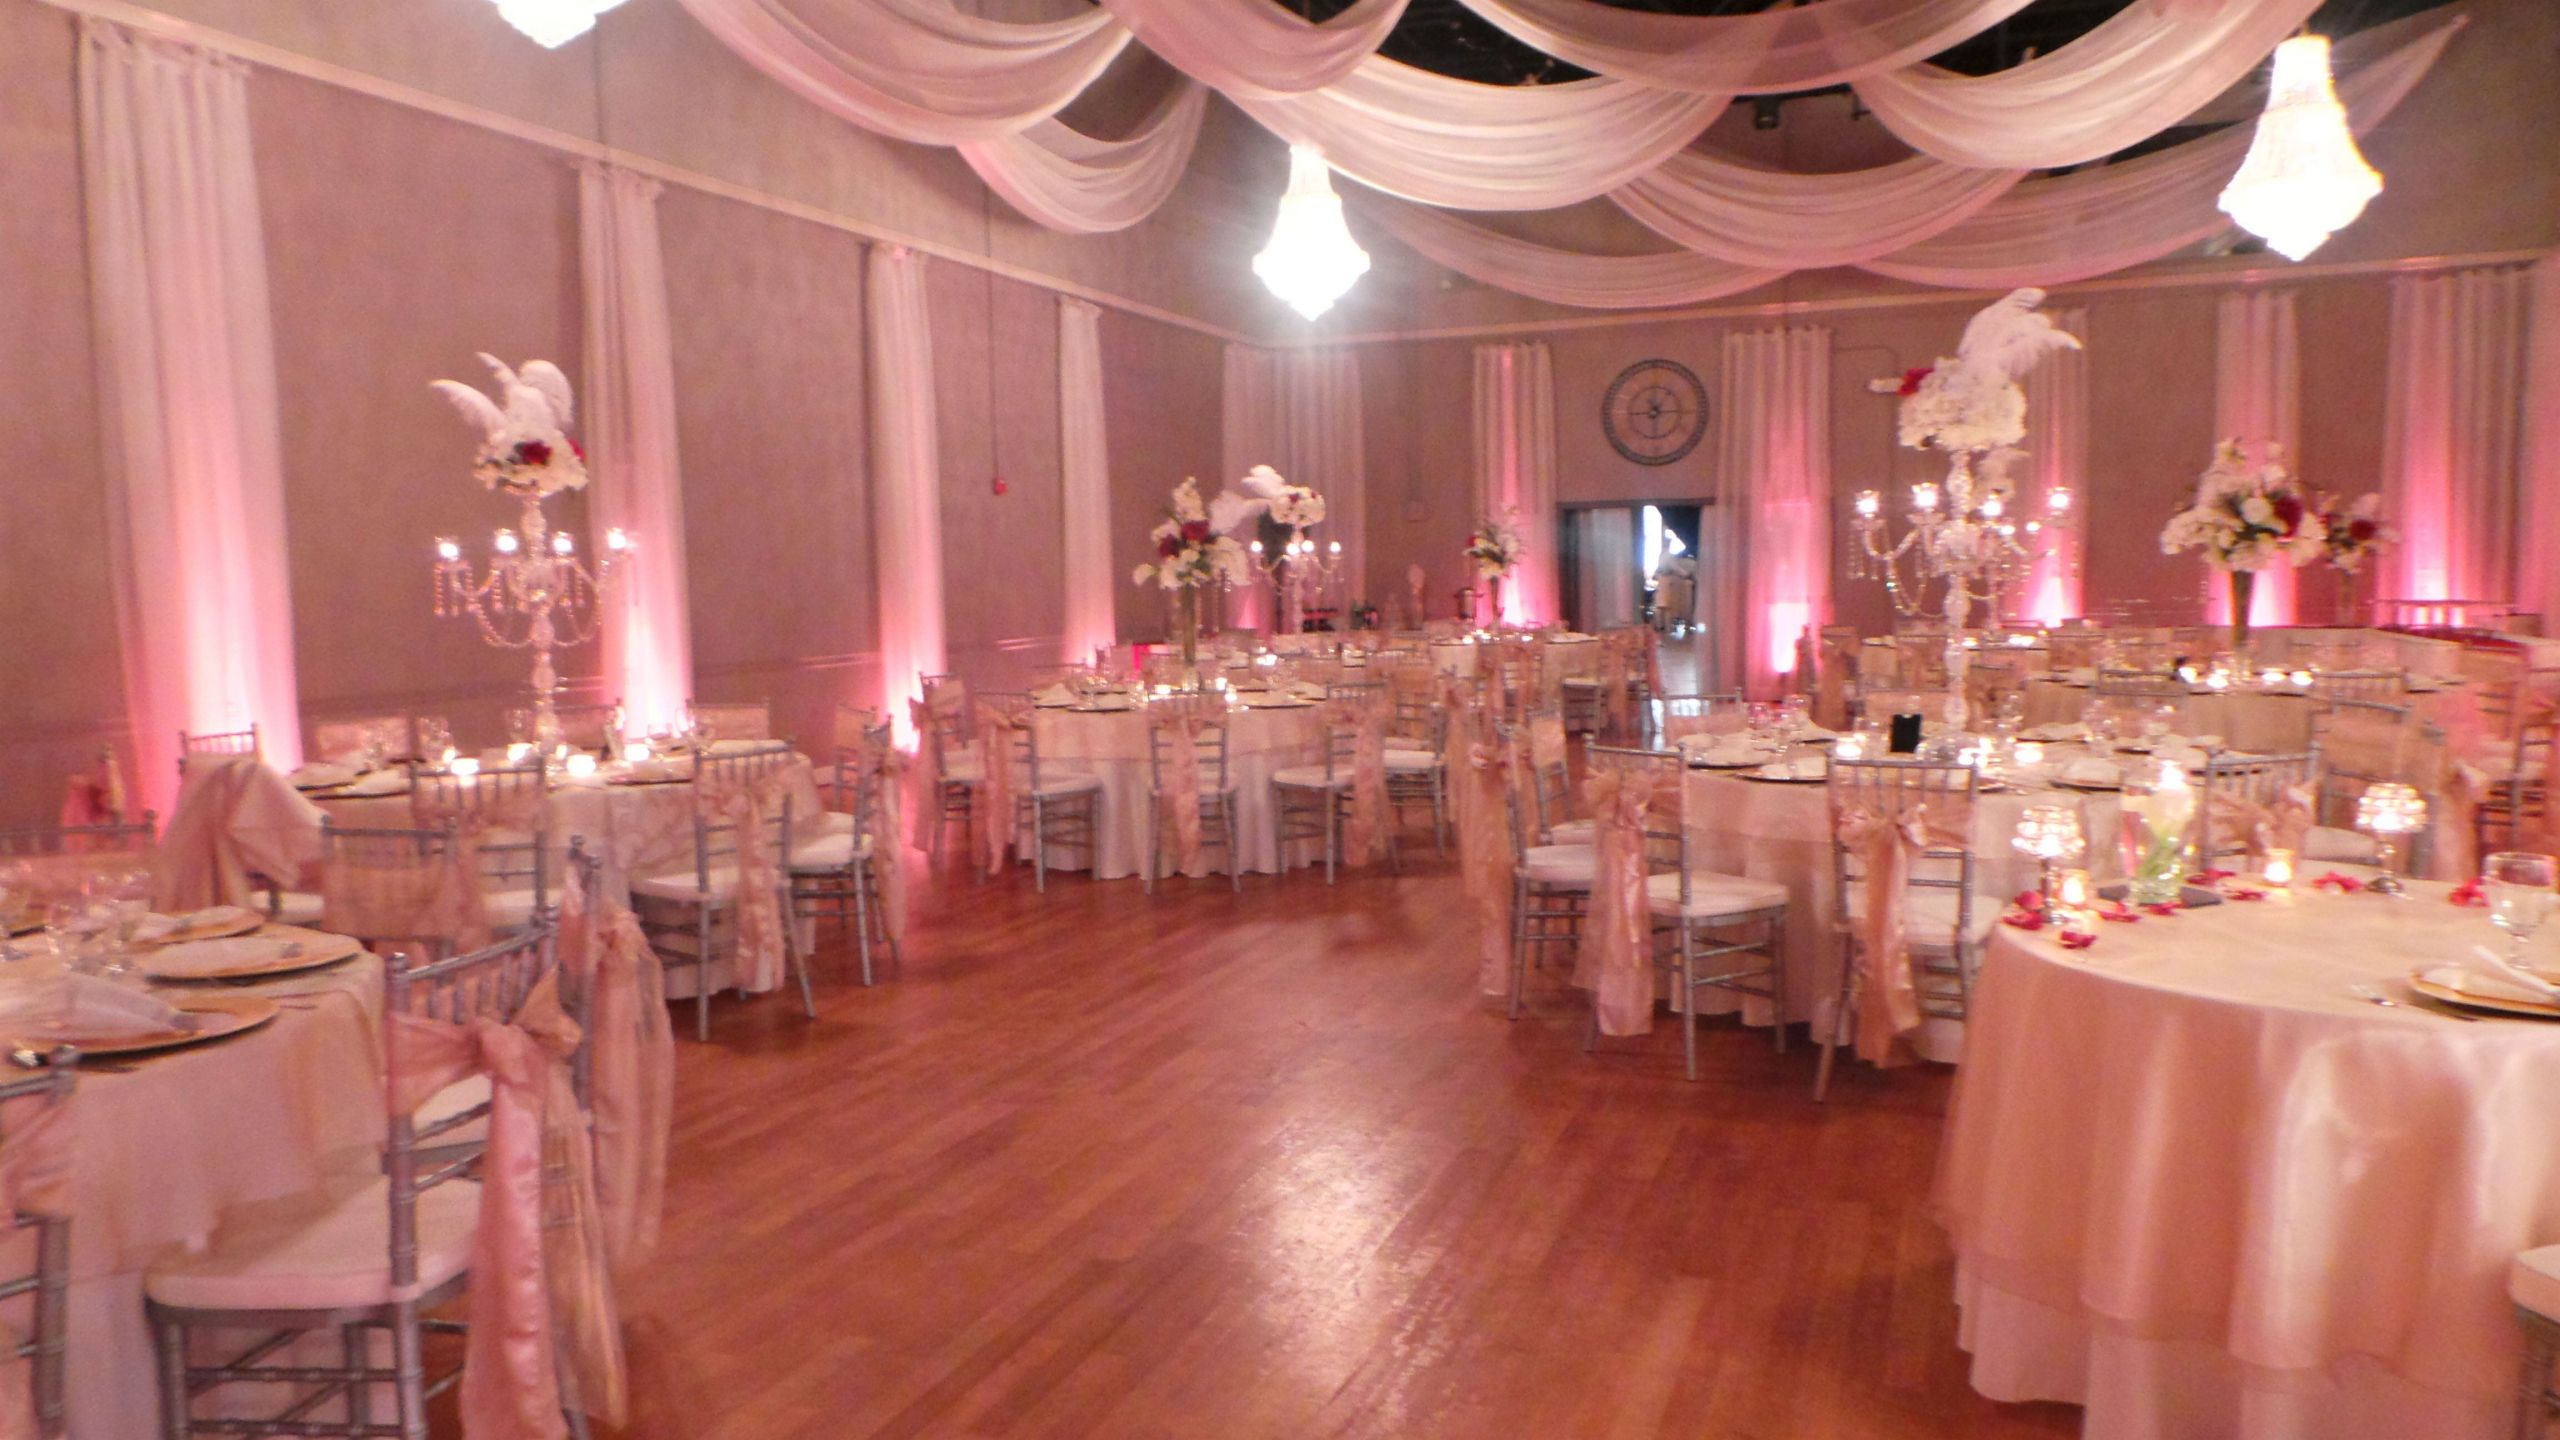 Engagement Party Venue Ideas
 Stunning reception at The Crystal Ballroom in Orlando